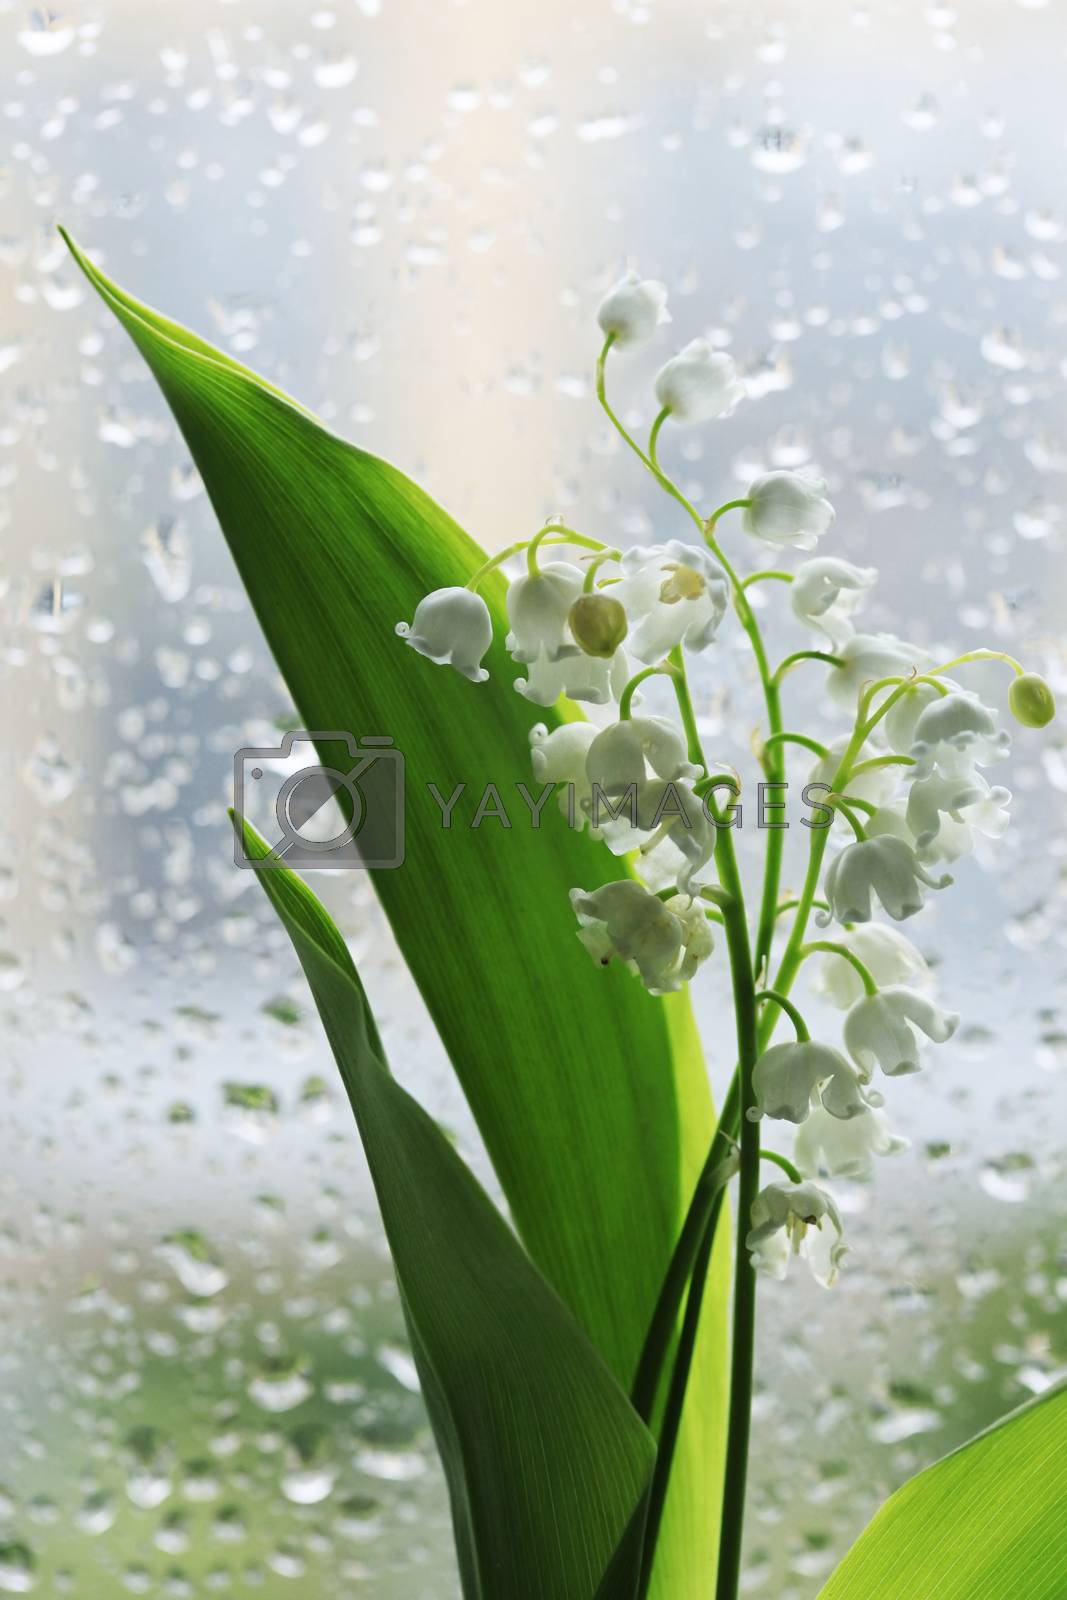 Royalty free image of Lilies of the Valley by friday